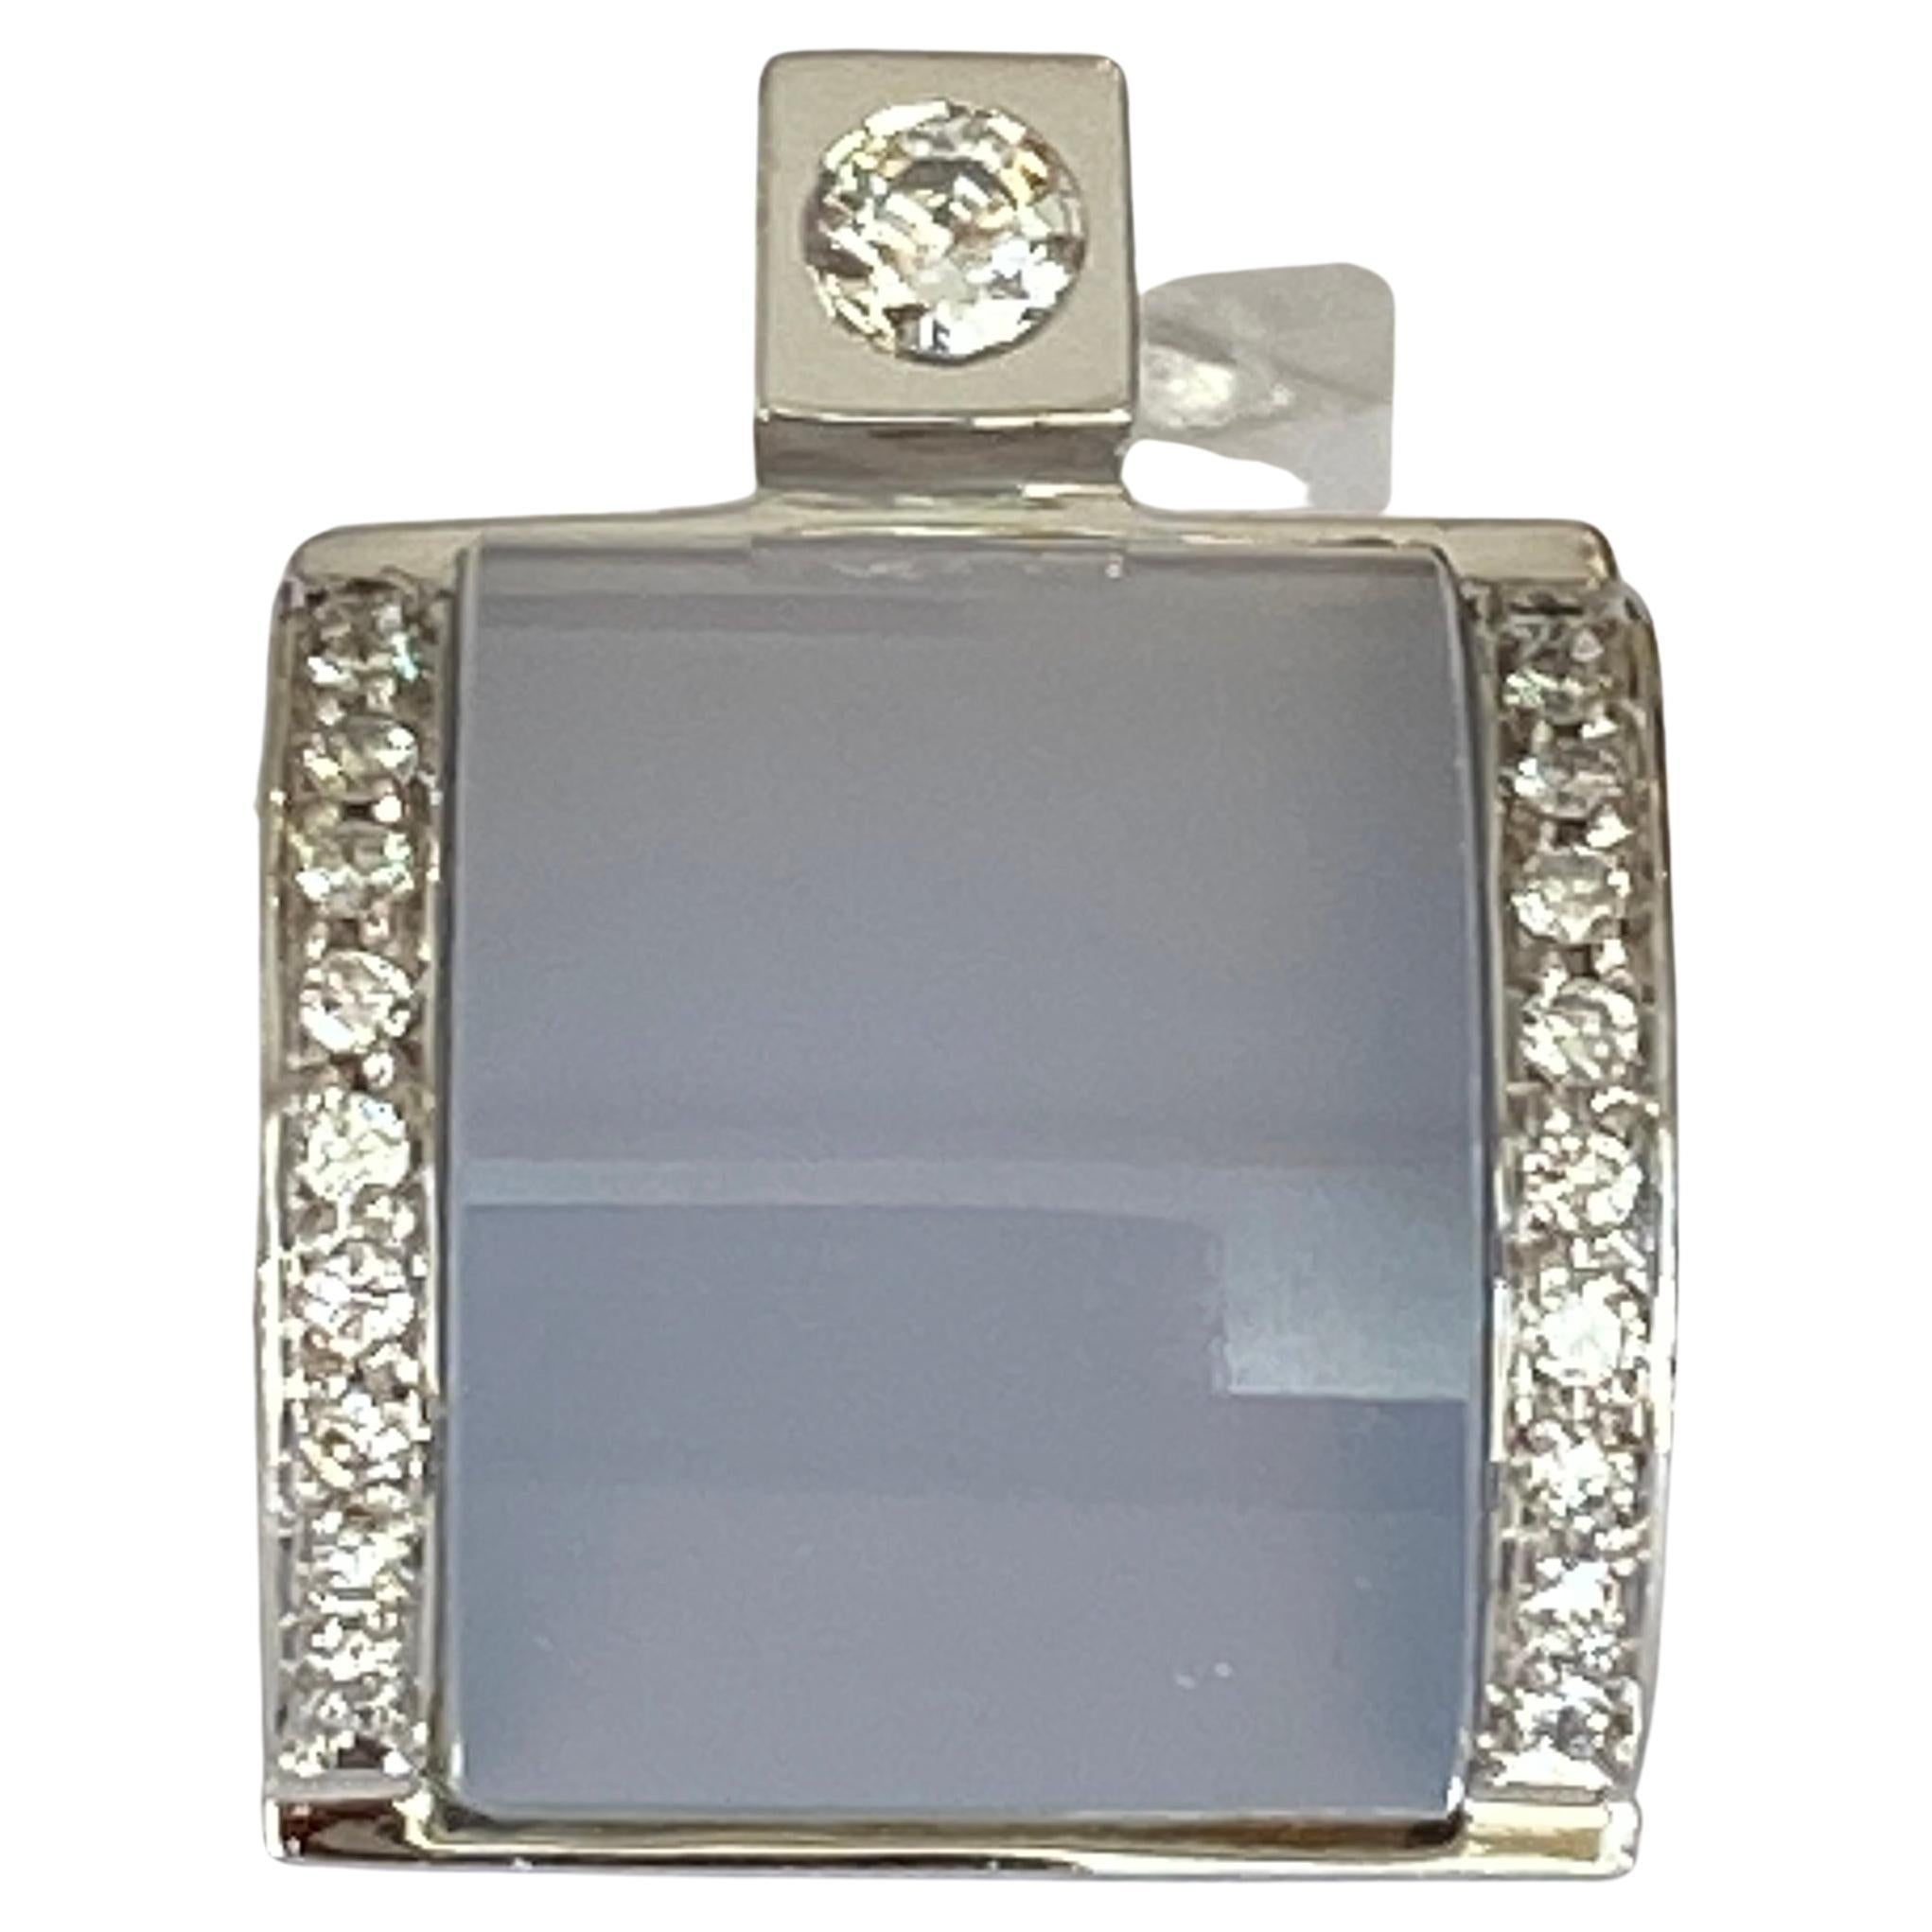 Offered ingood condition, a beautiful 18 KT  white  gold pendant set with 23 brilliant cut diamonds of approx. 0.33 ct in total, one of which is approx. 0.15 ct G-H/VS/SI and chalcedeon.
Hallmarks: 750 Dutch hallmark,
Import hallmark J. Boukamp,